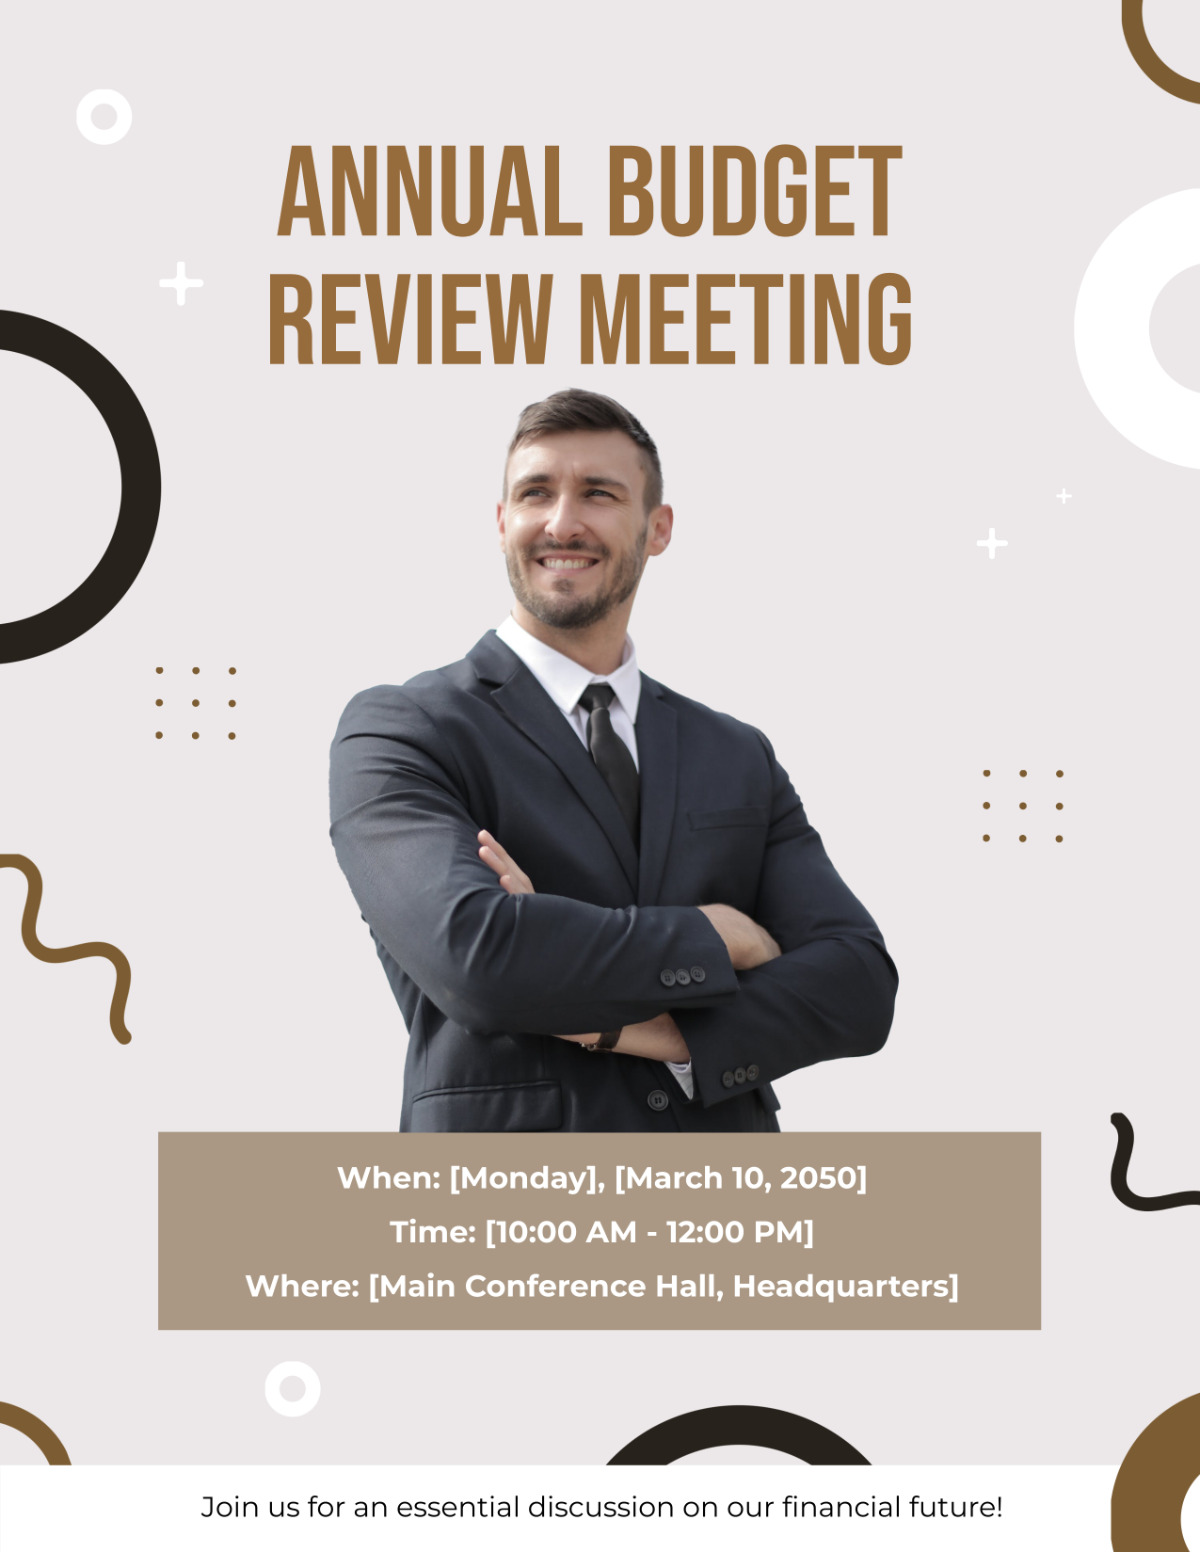 Annual Budget Review Meeting Flyer Template